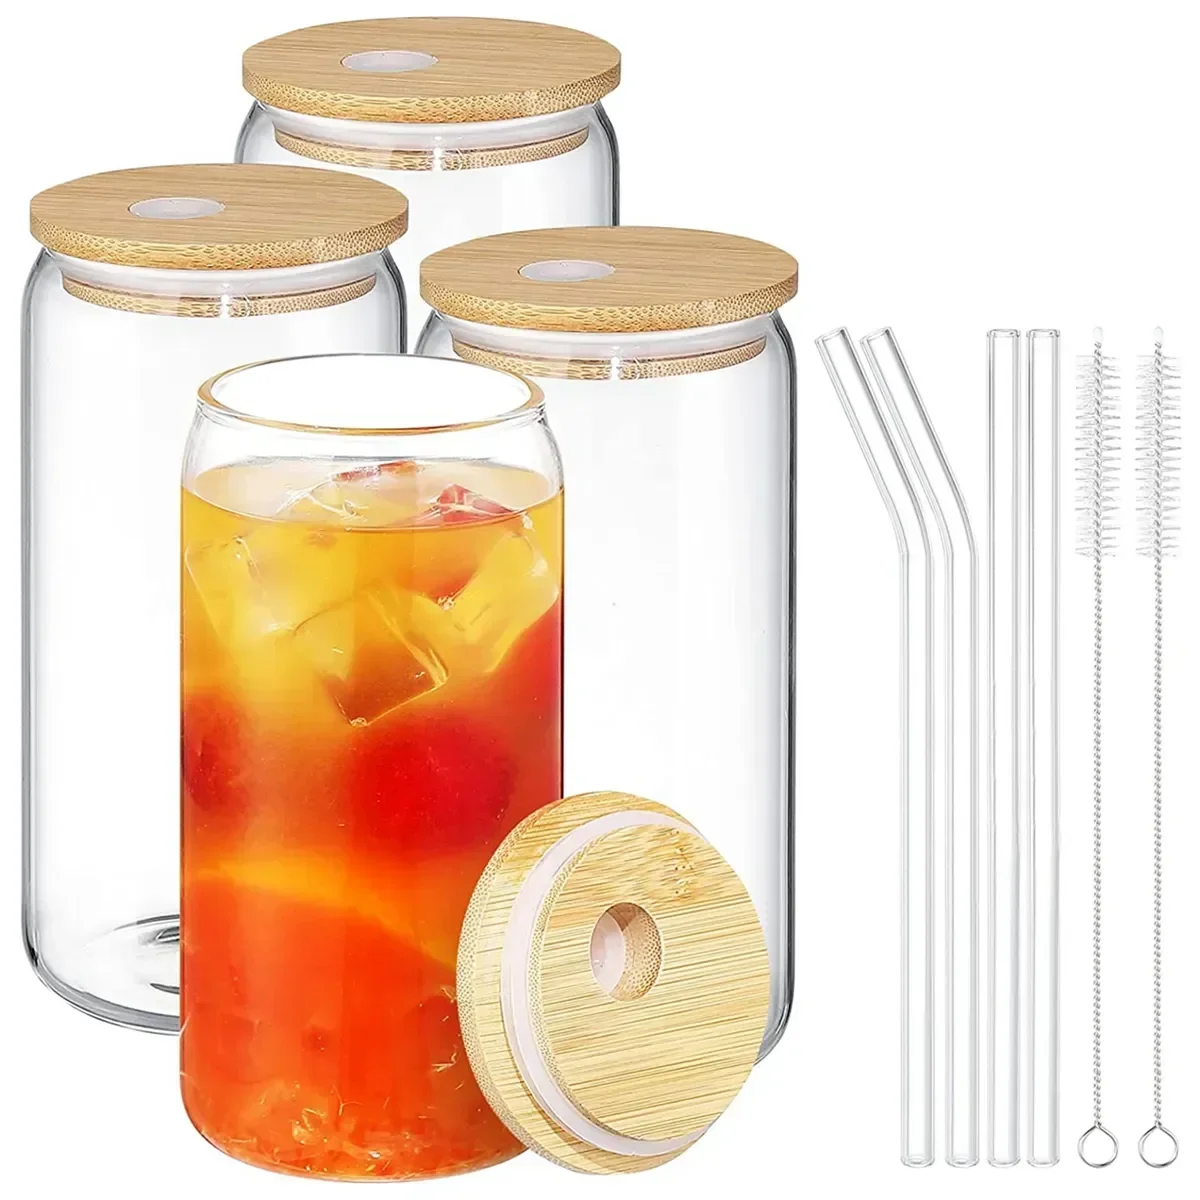 

Reusable Lids Straws 360/480ml Brew Cup Glasses Coffee Beer And Glasses for 4pcs Bar Cup Cold Can Coke Juice With Glass Cups